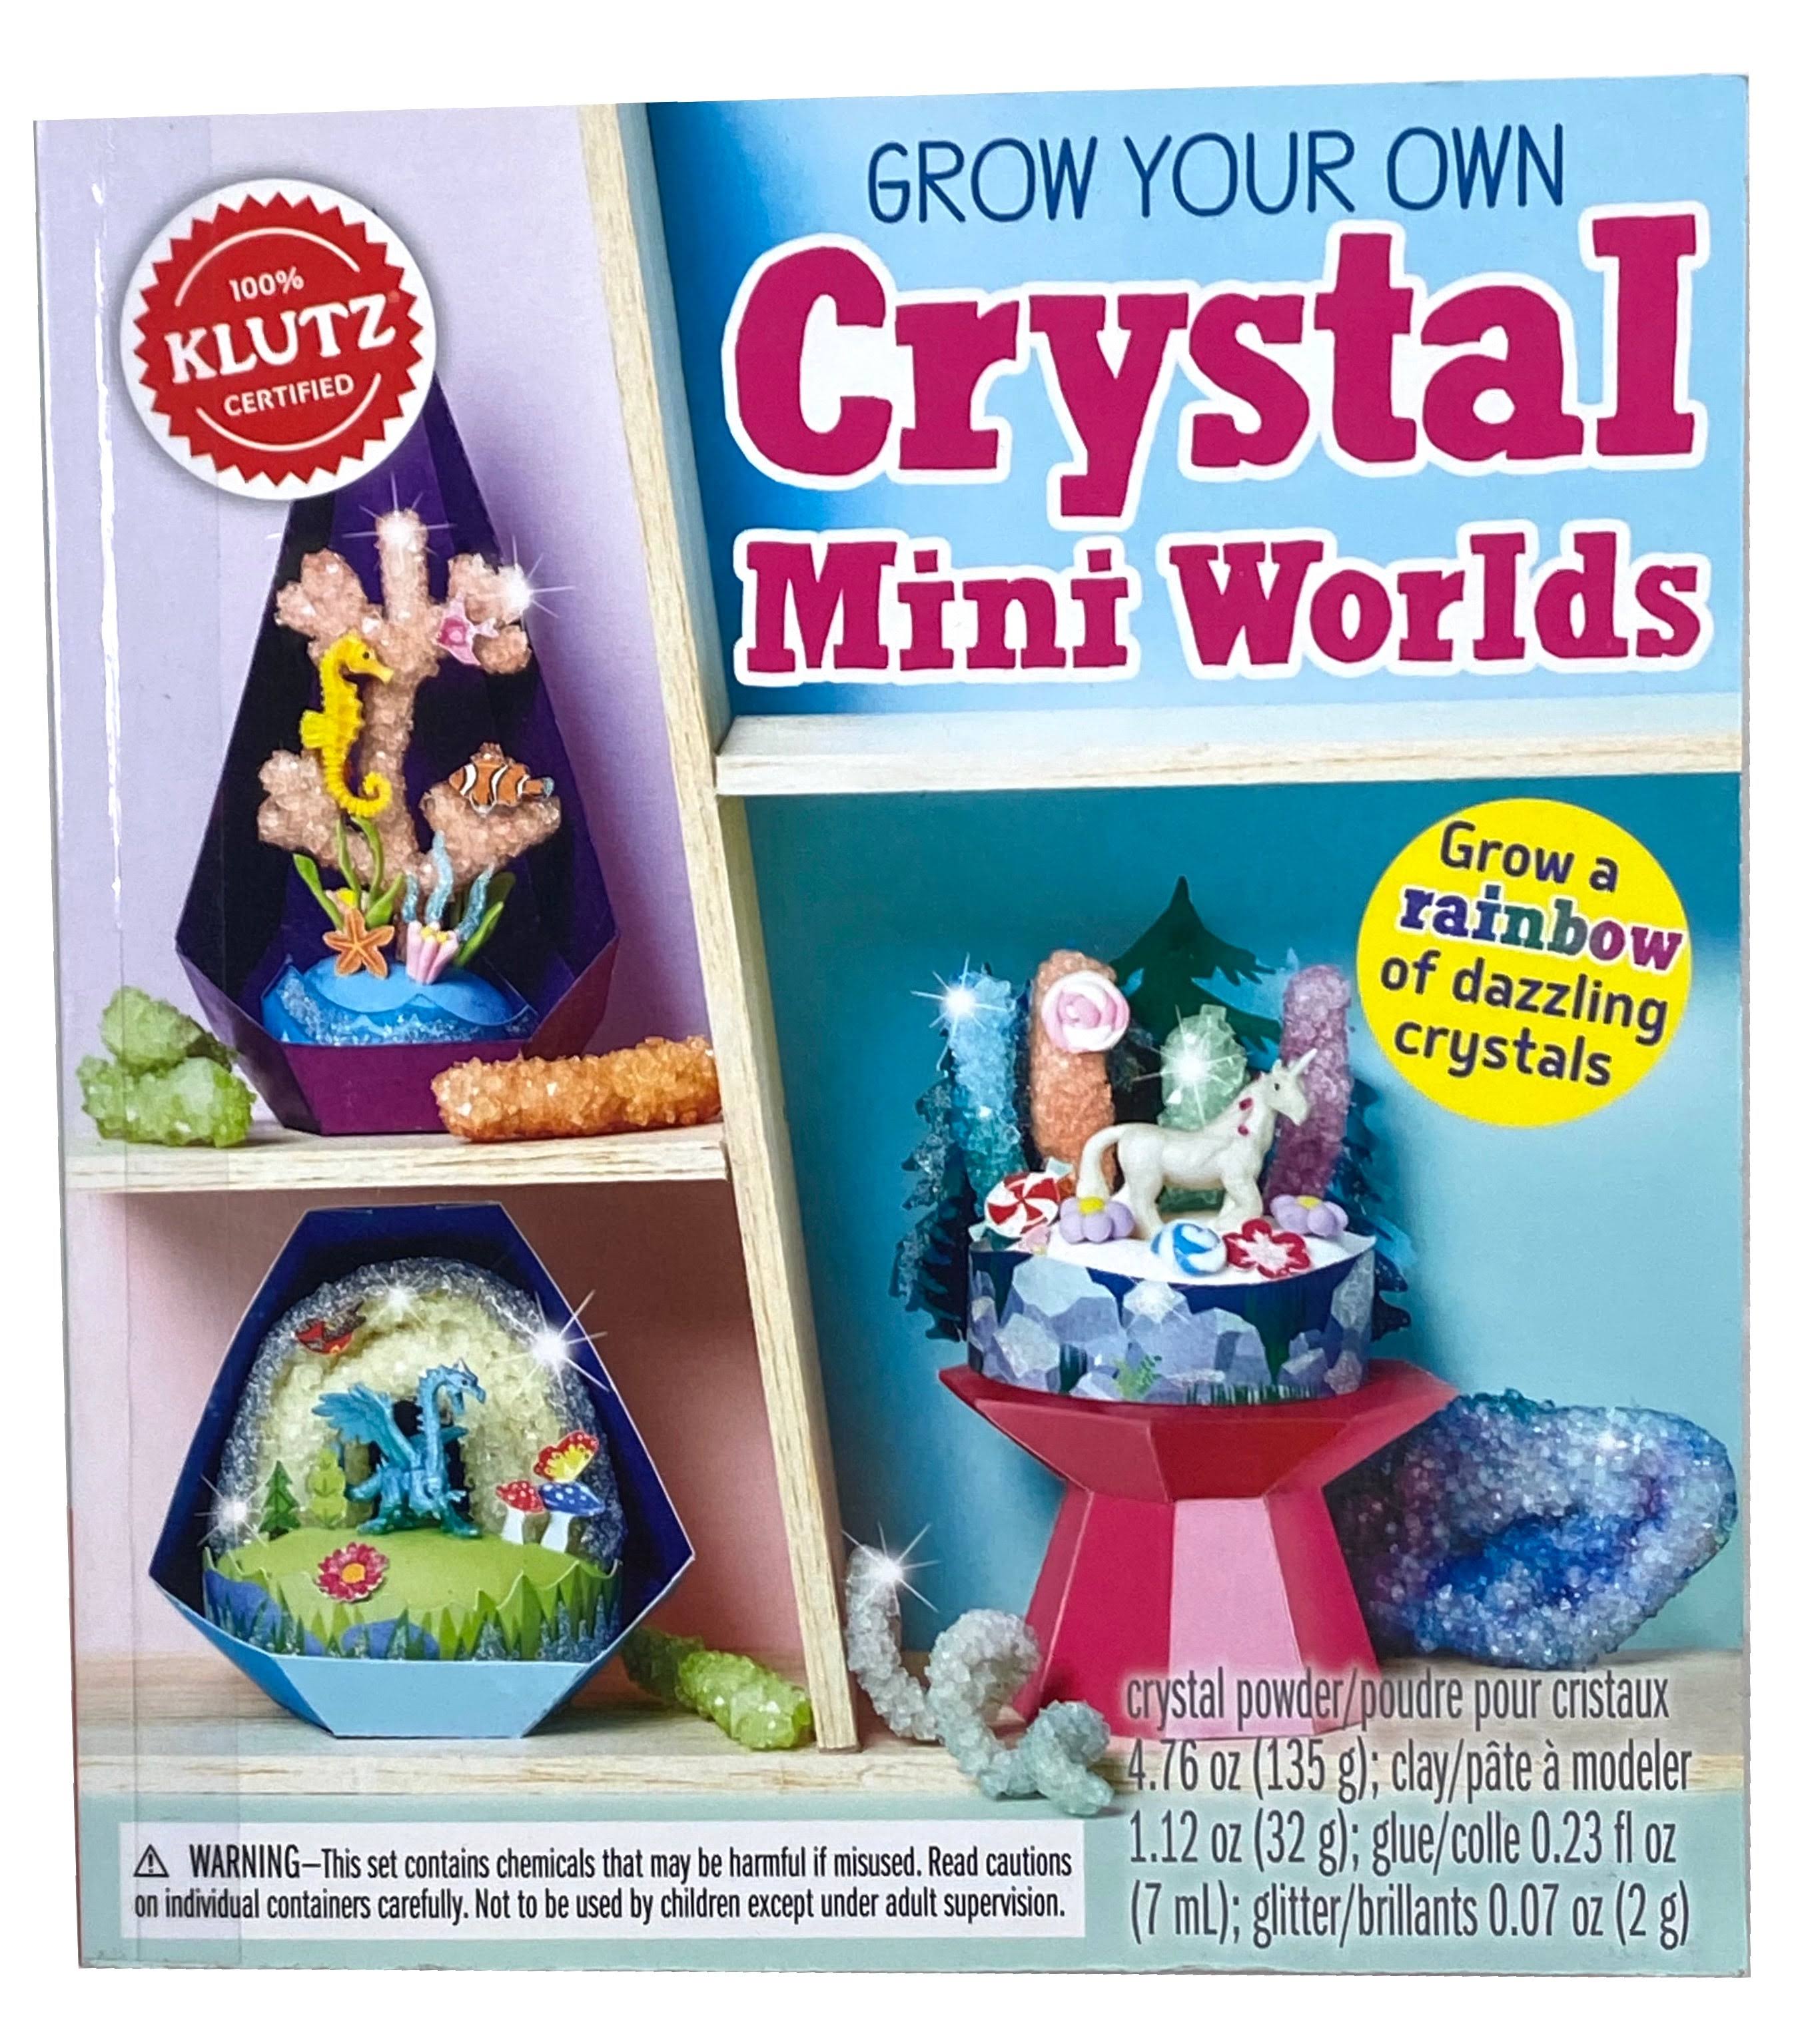 Grow Your Own Crystal Mini Worlds [Book]